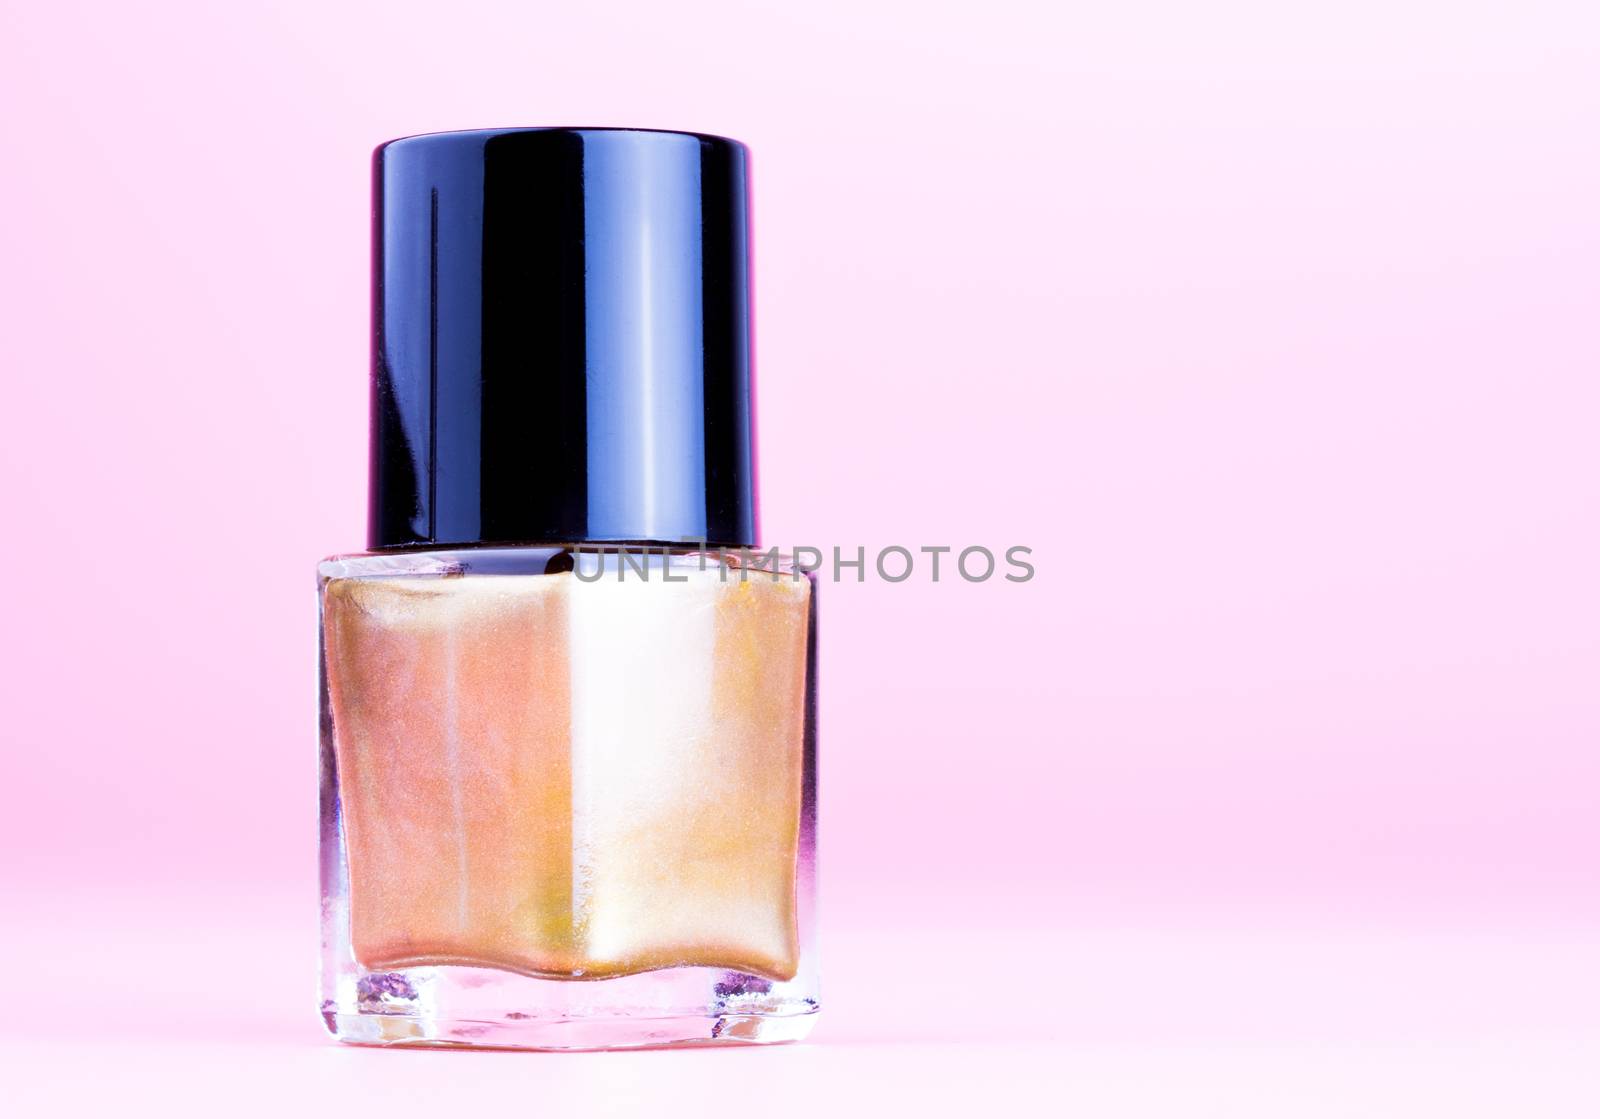 Bottle of gold nail polish by lanalanglois